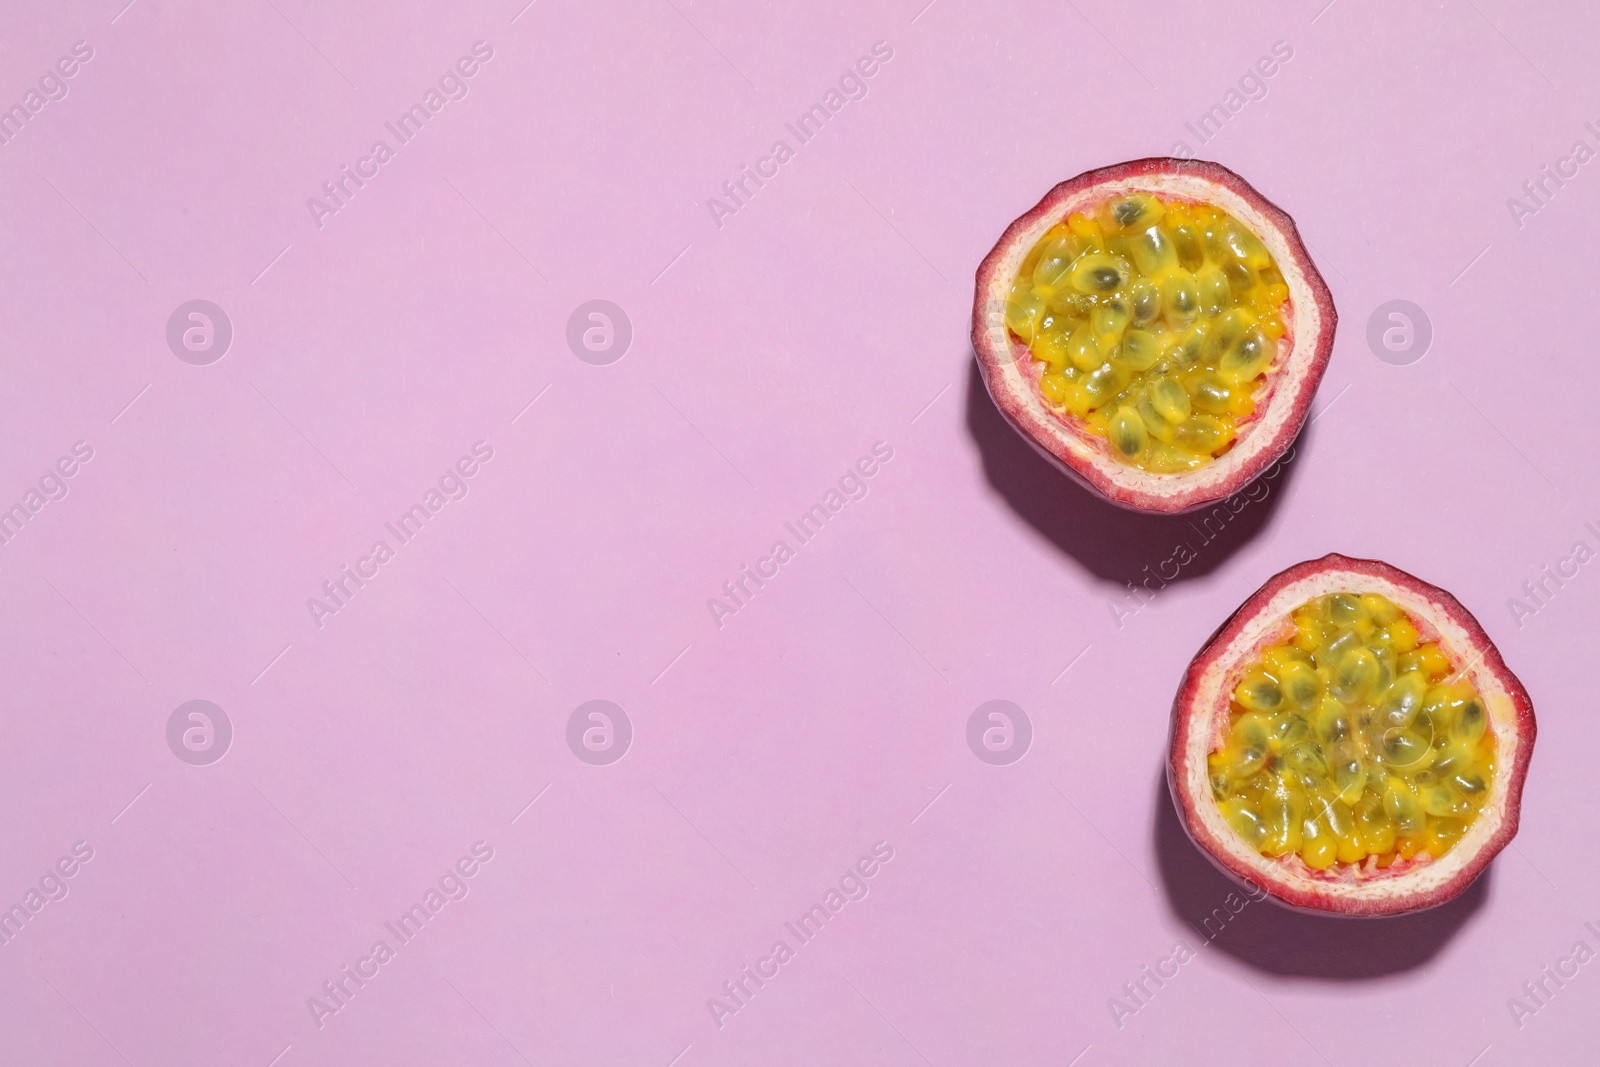 Photo of Halves of passion fruit (maracuya) on pink background, flat lay. Space for text